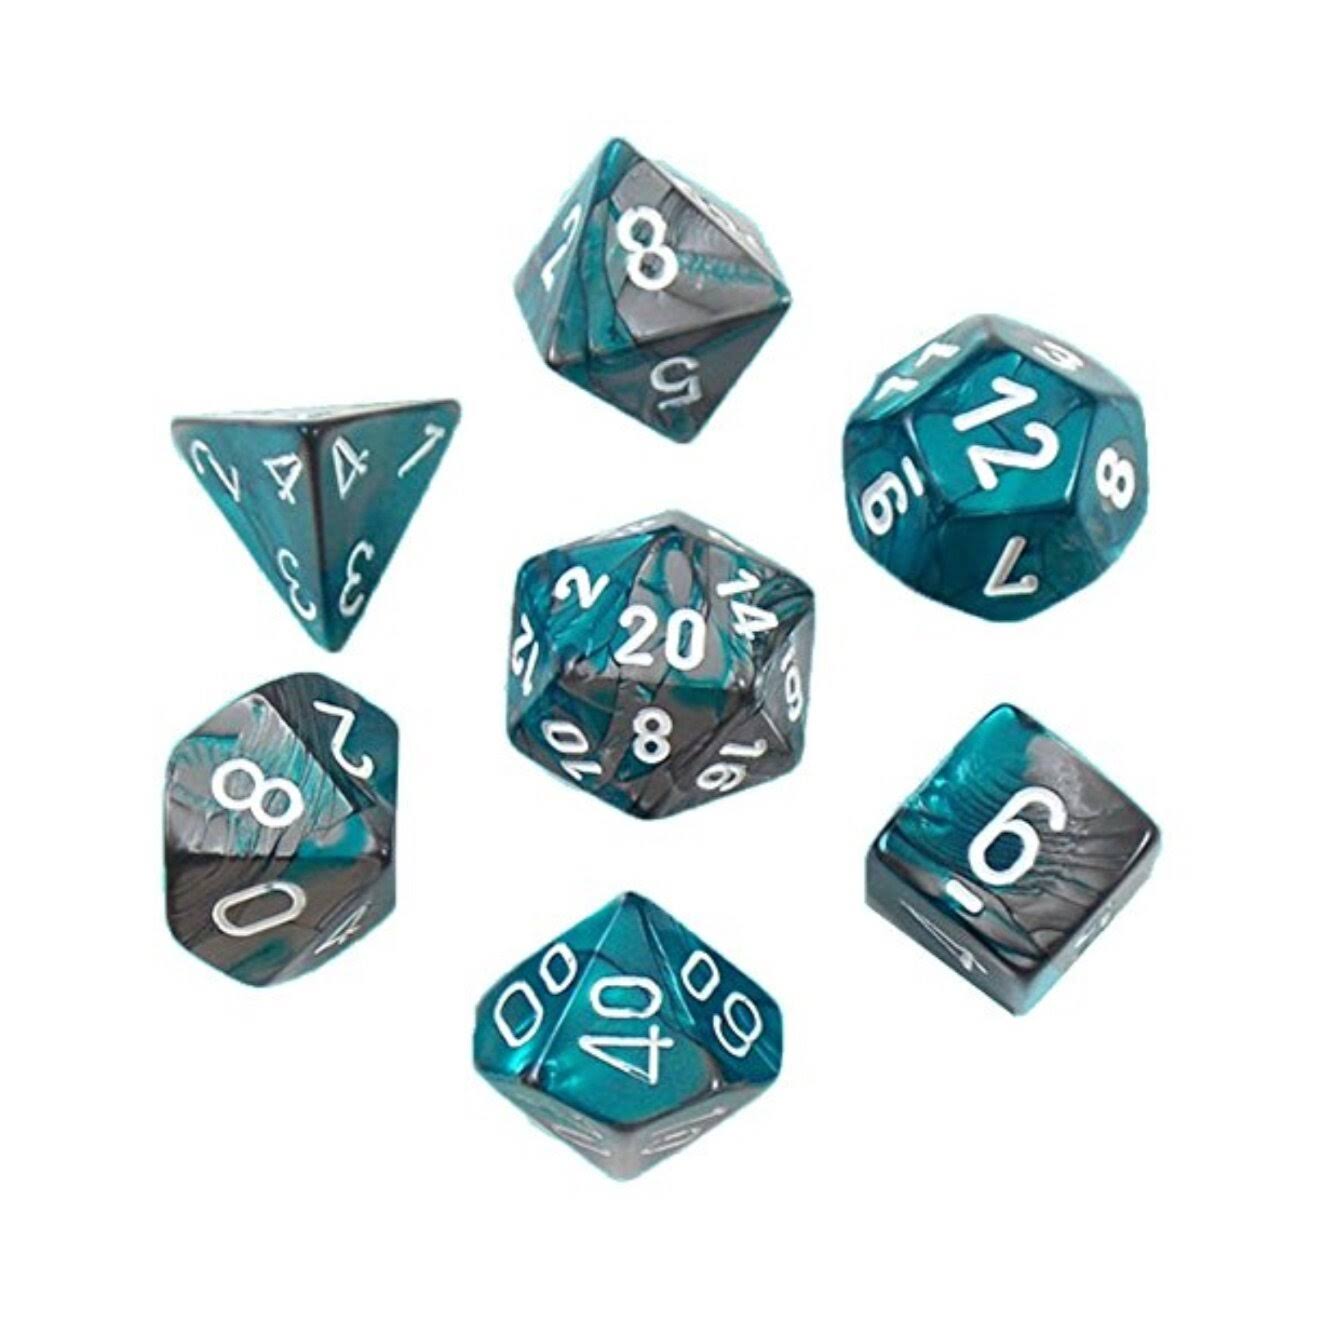 Chessex Gemini Poly 7 Dice Set: Steel-teal/white